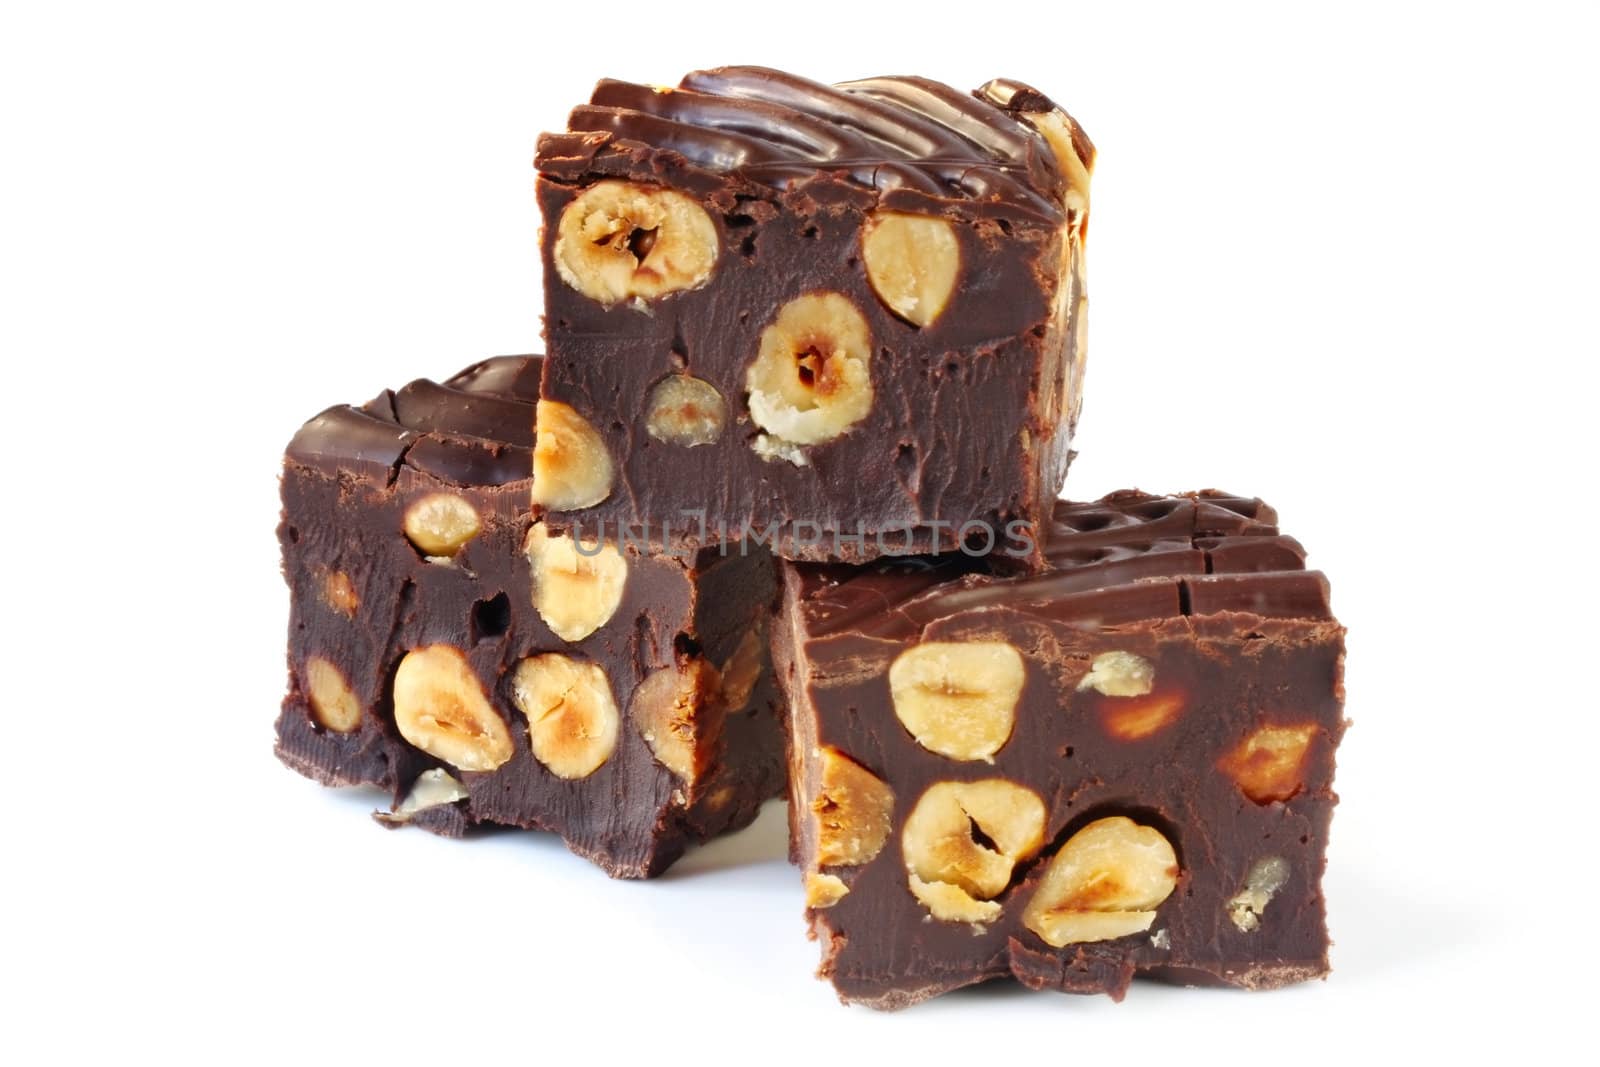 Chocolate fudge brownies with hazelnuts, isolated on white.